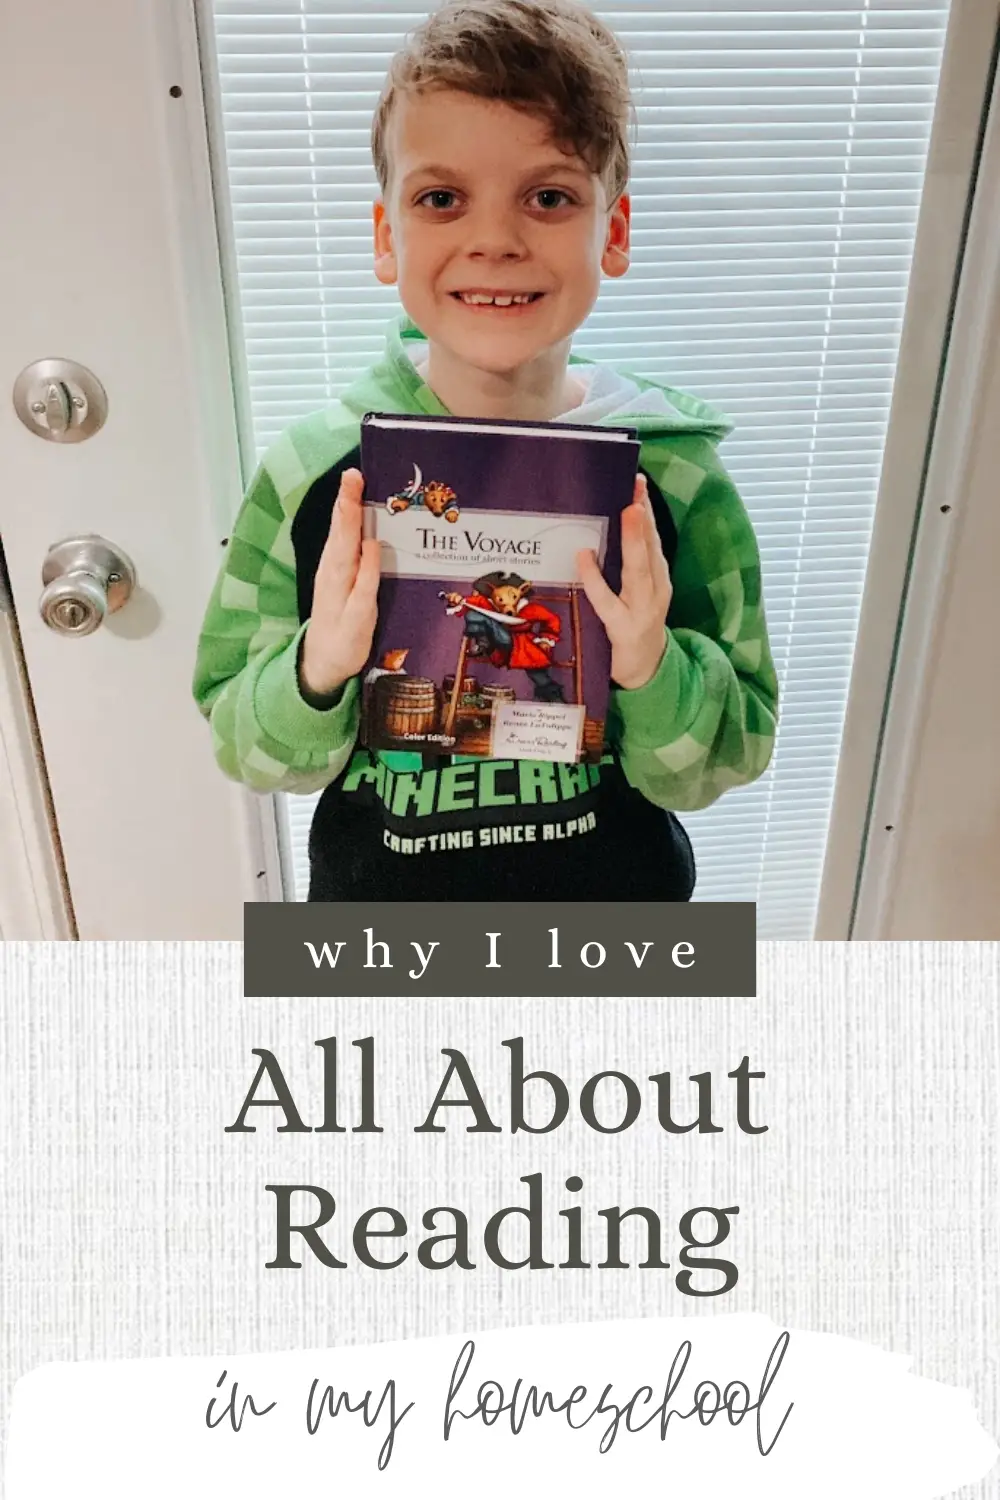 5 Reasons I Love the All About Reading Curriculum